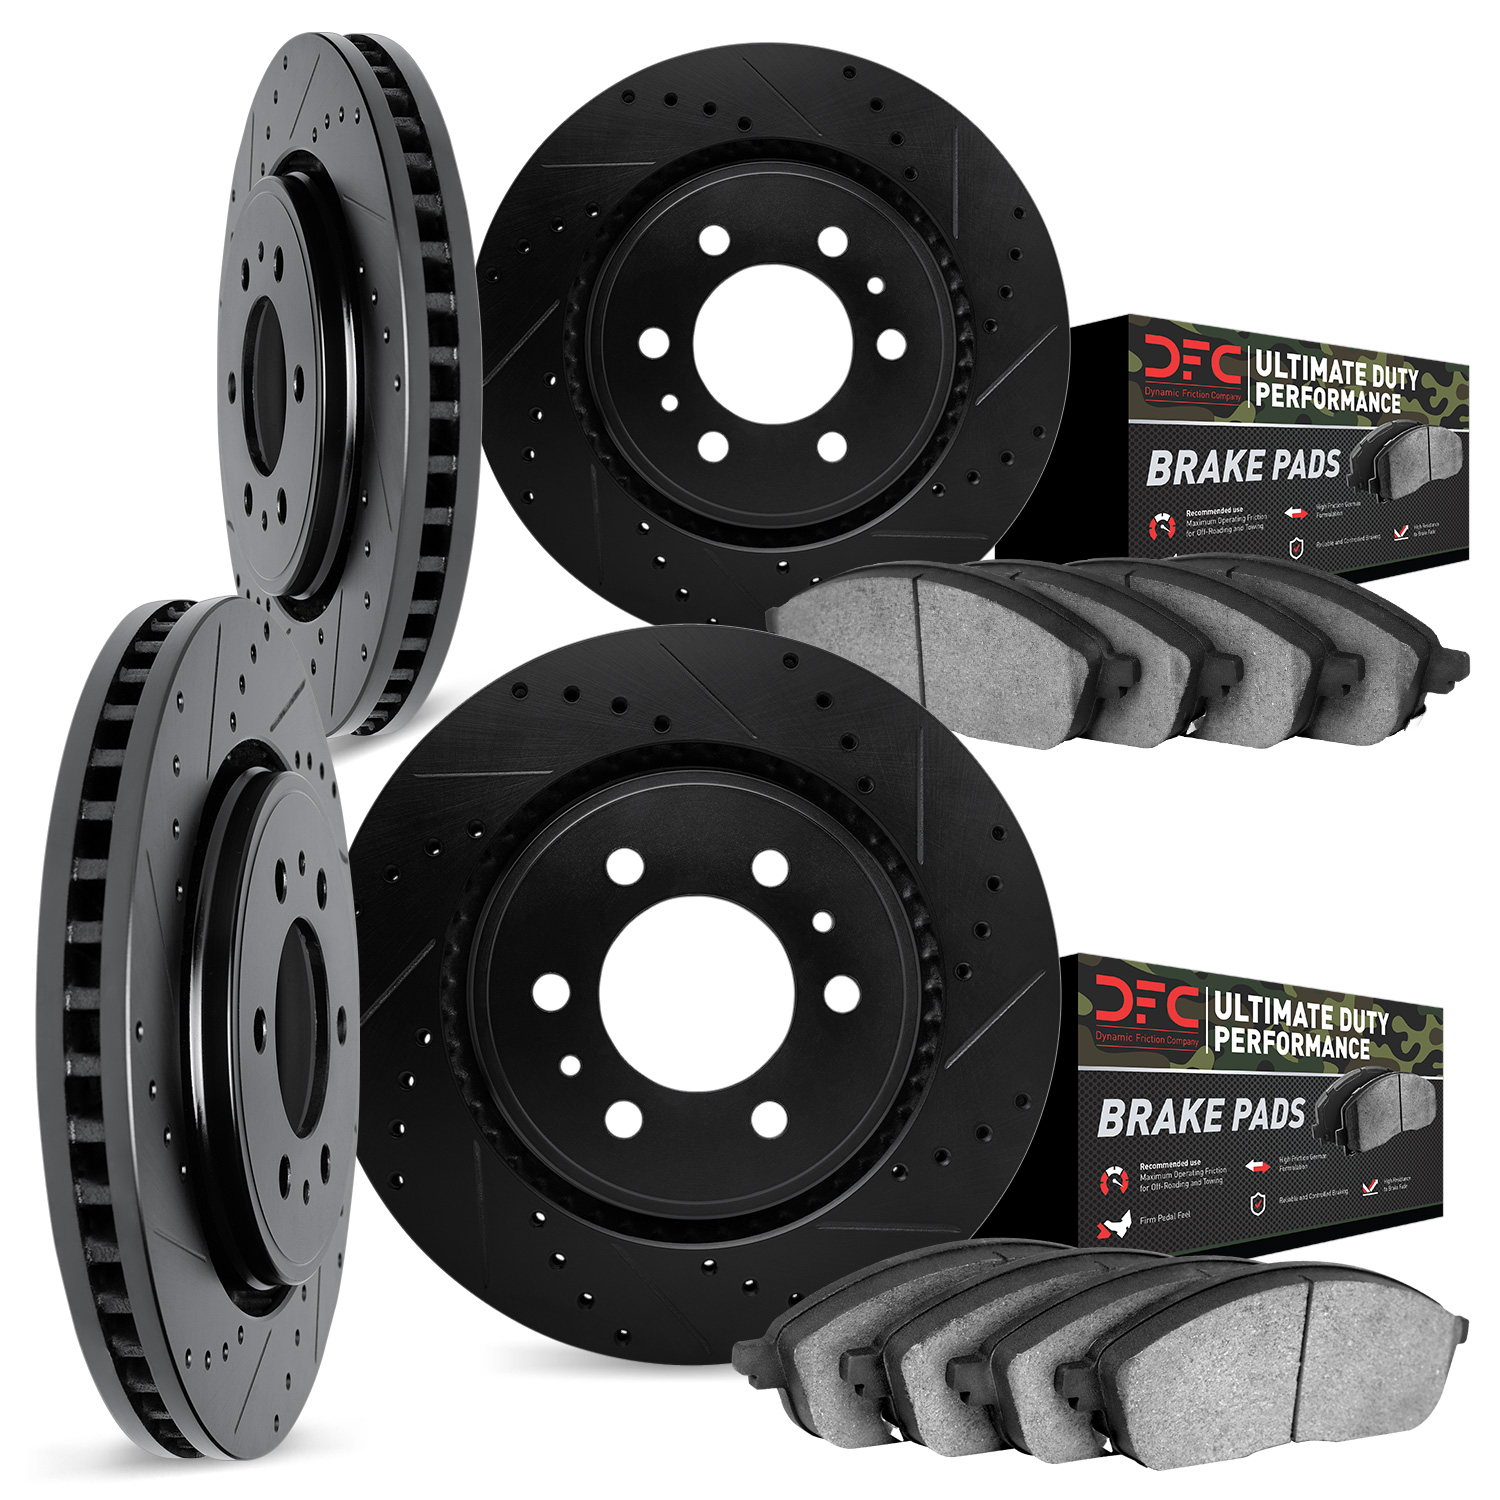 8404-76005 Drilled/Slotted Brake Rotors with Ultimate-Duty Brake Pads Kit [Black], 2010-2014 Lexus/Toyota/Scion, Position: Front